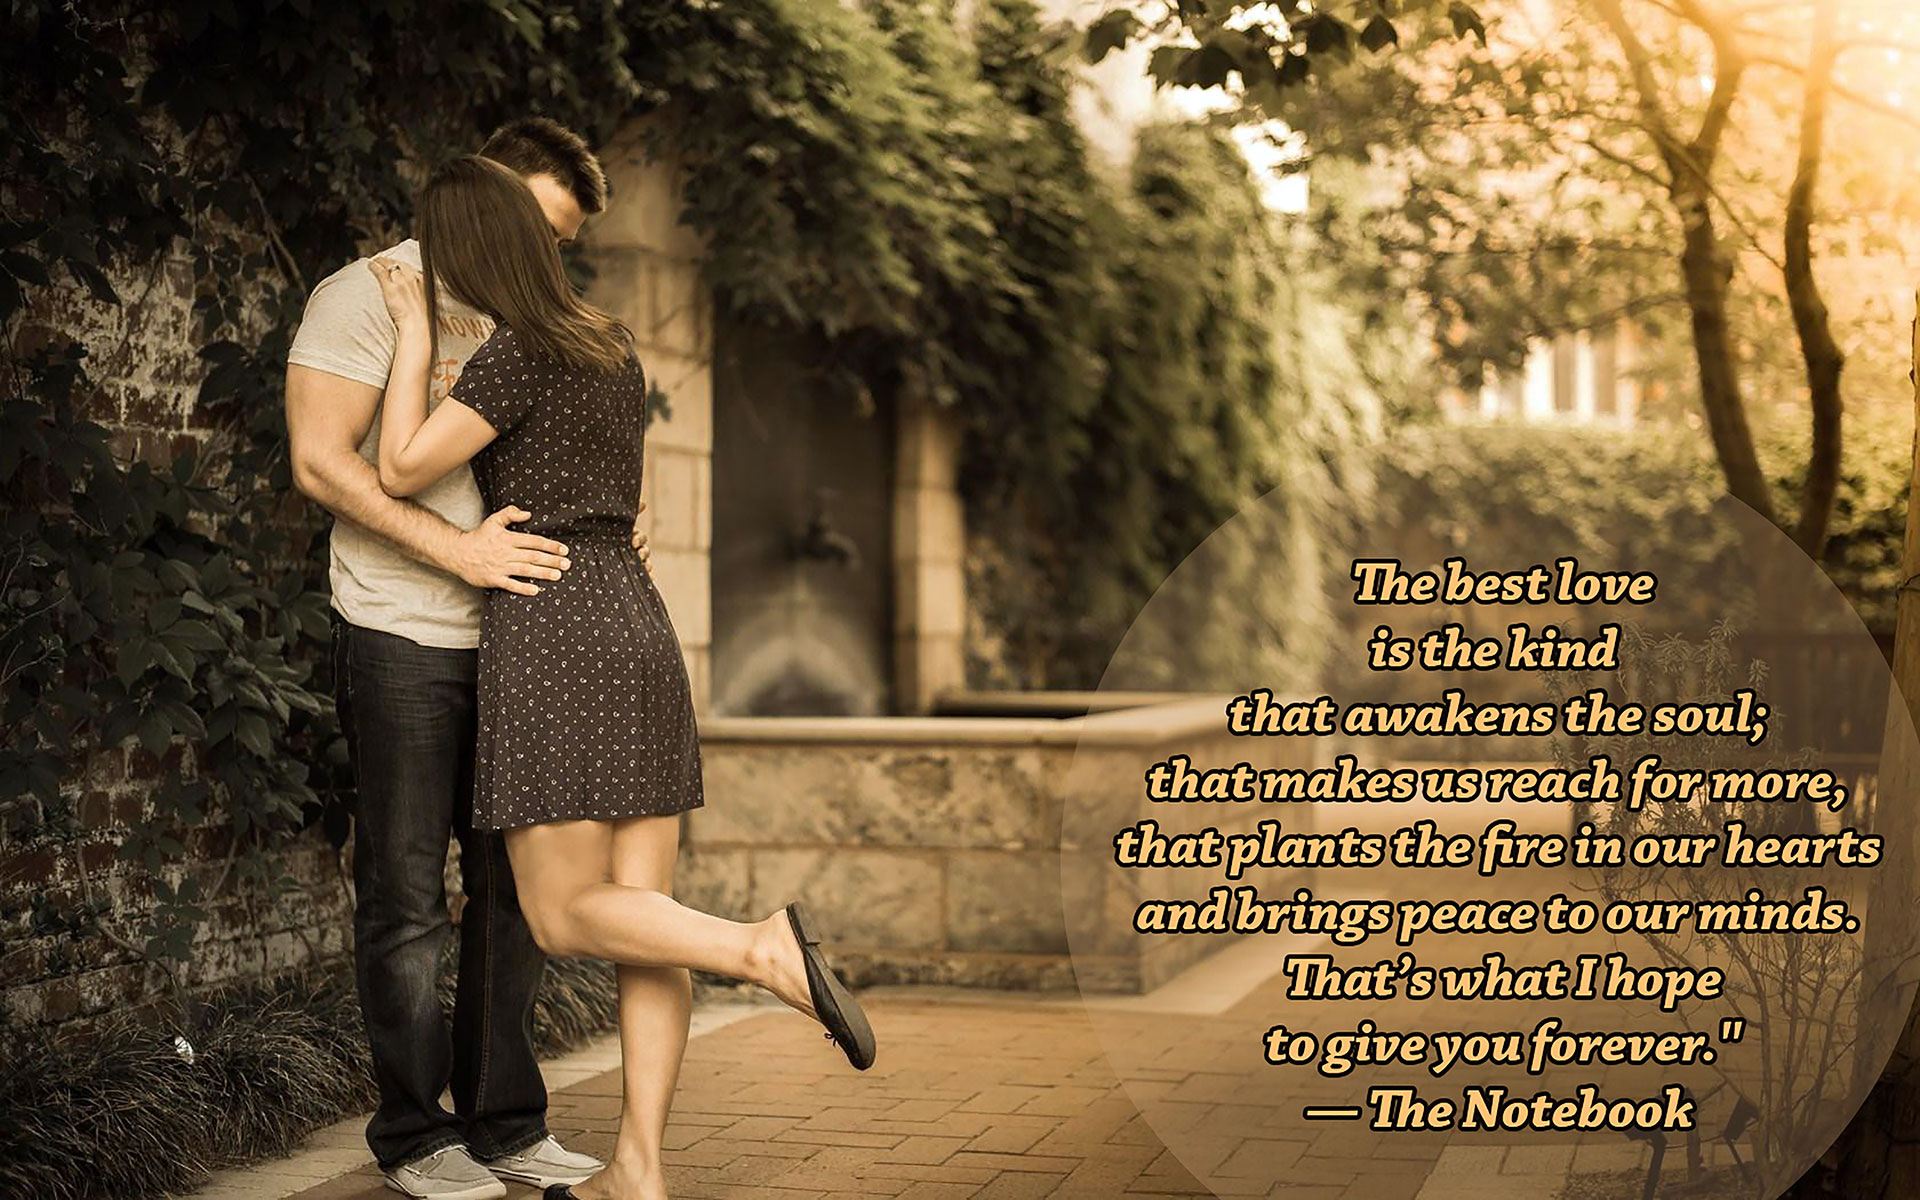 Images Of Love Quotes - Kiss Images Hd Love - 1920x1200 Wallpaper -  